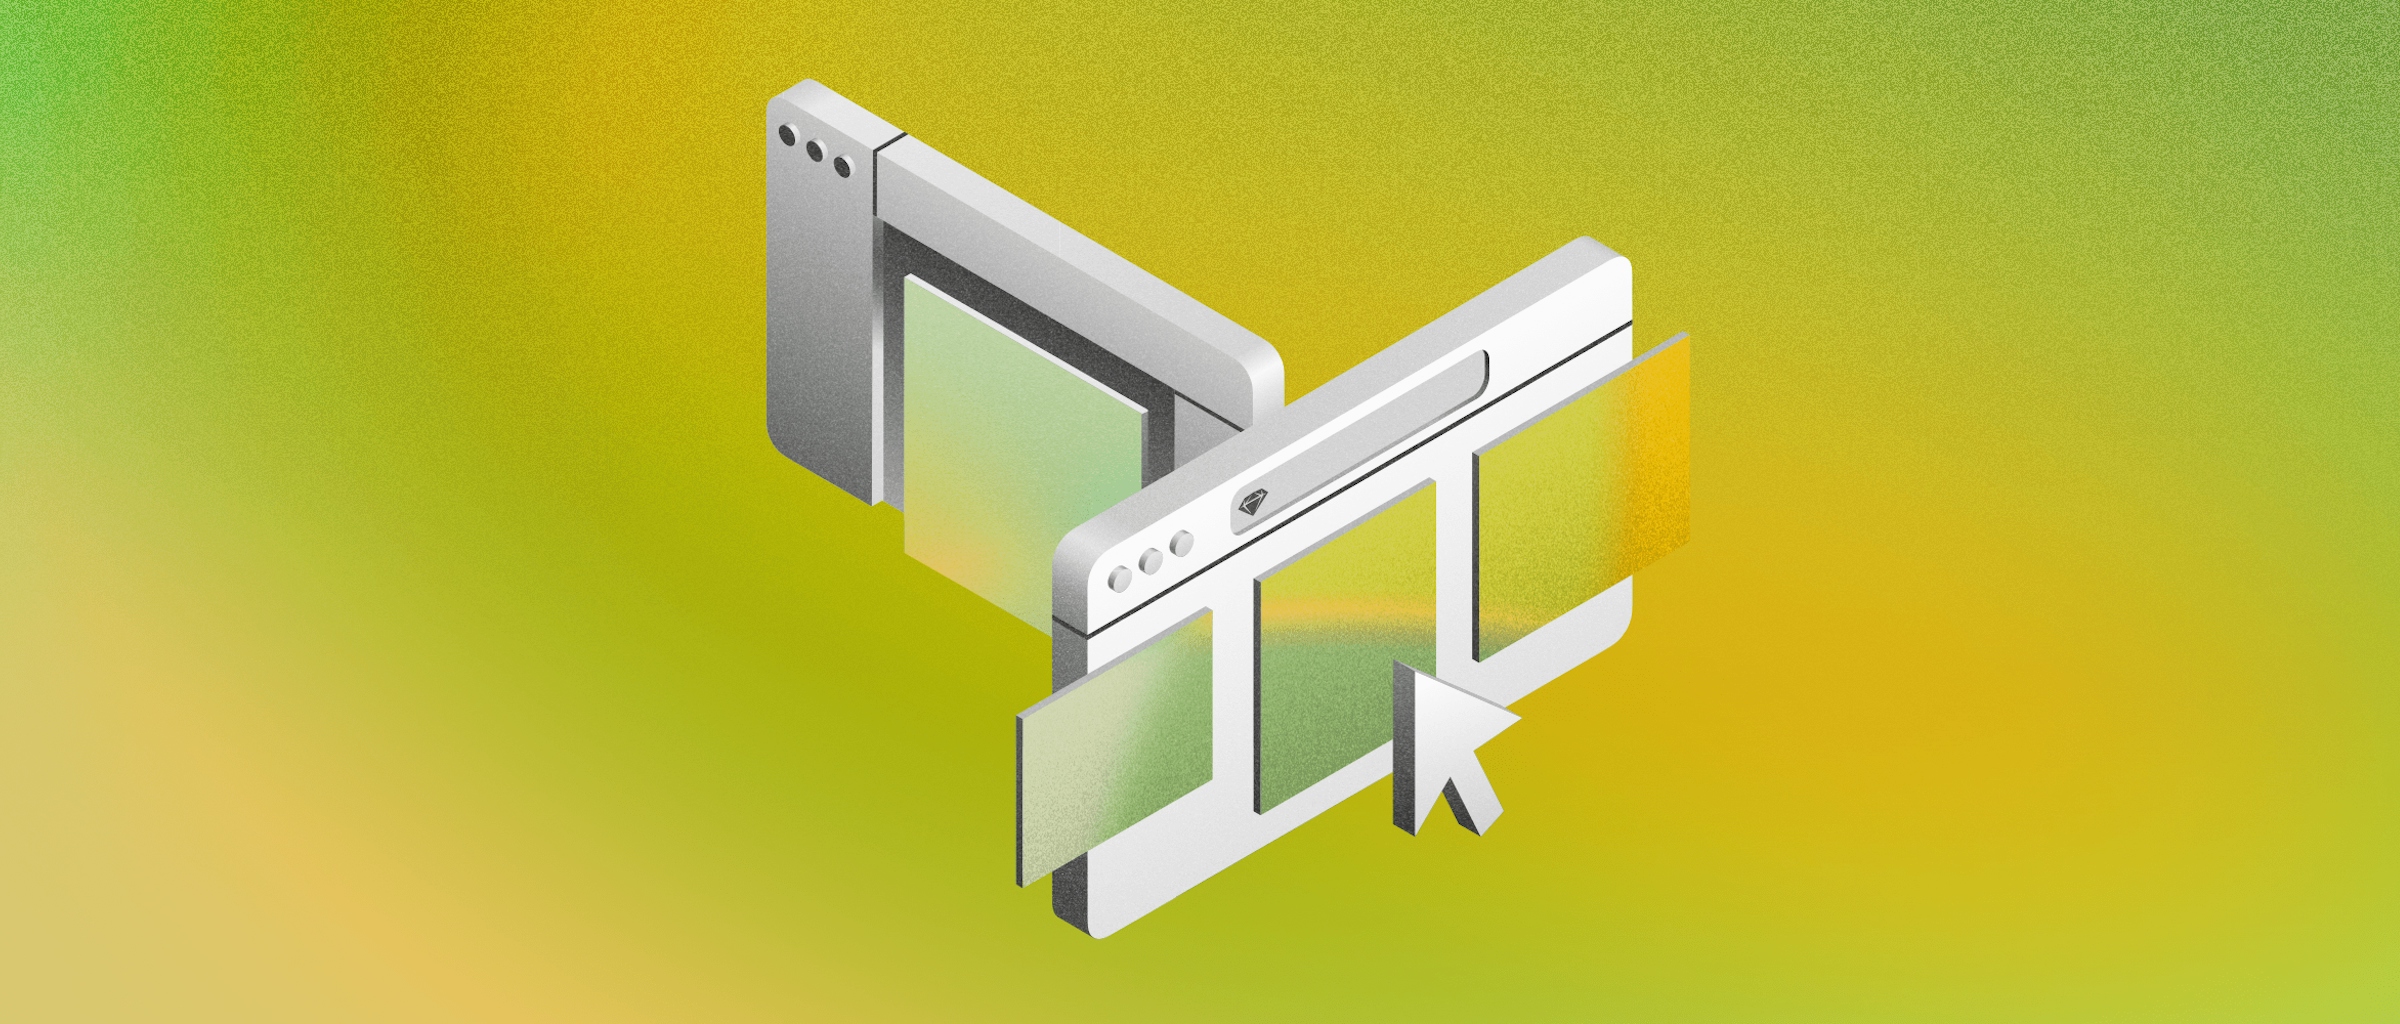 Illustrated image of two Mac windows at perpendicular angles on a green background